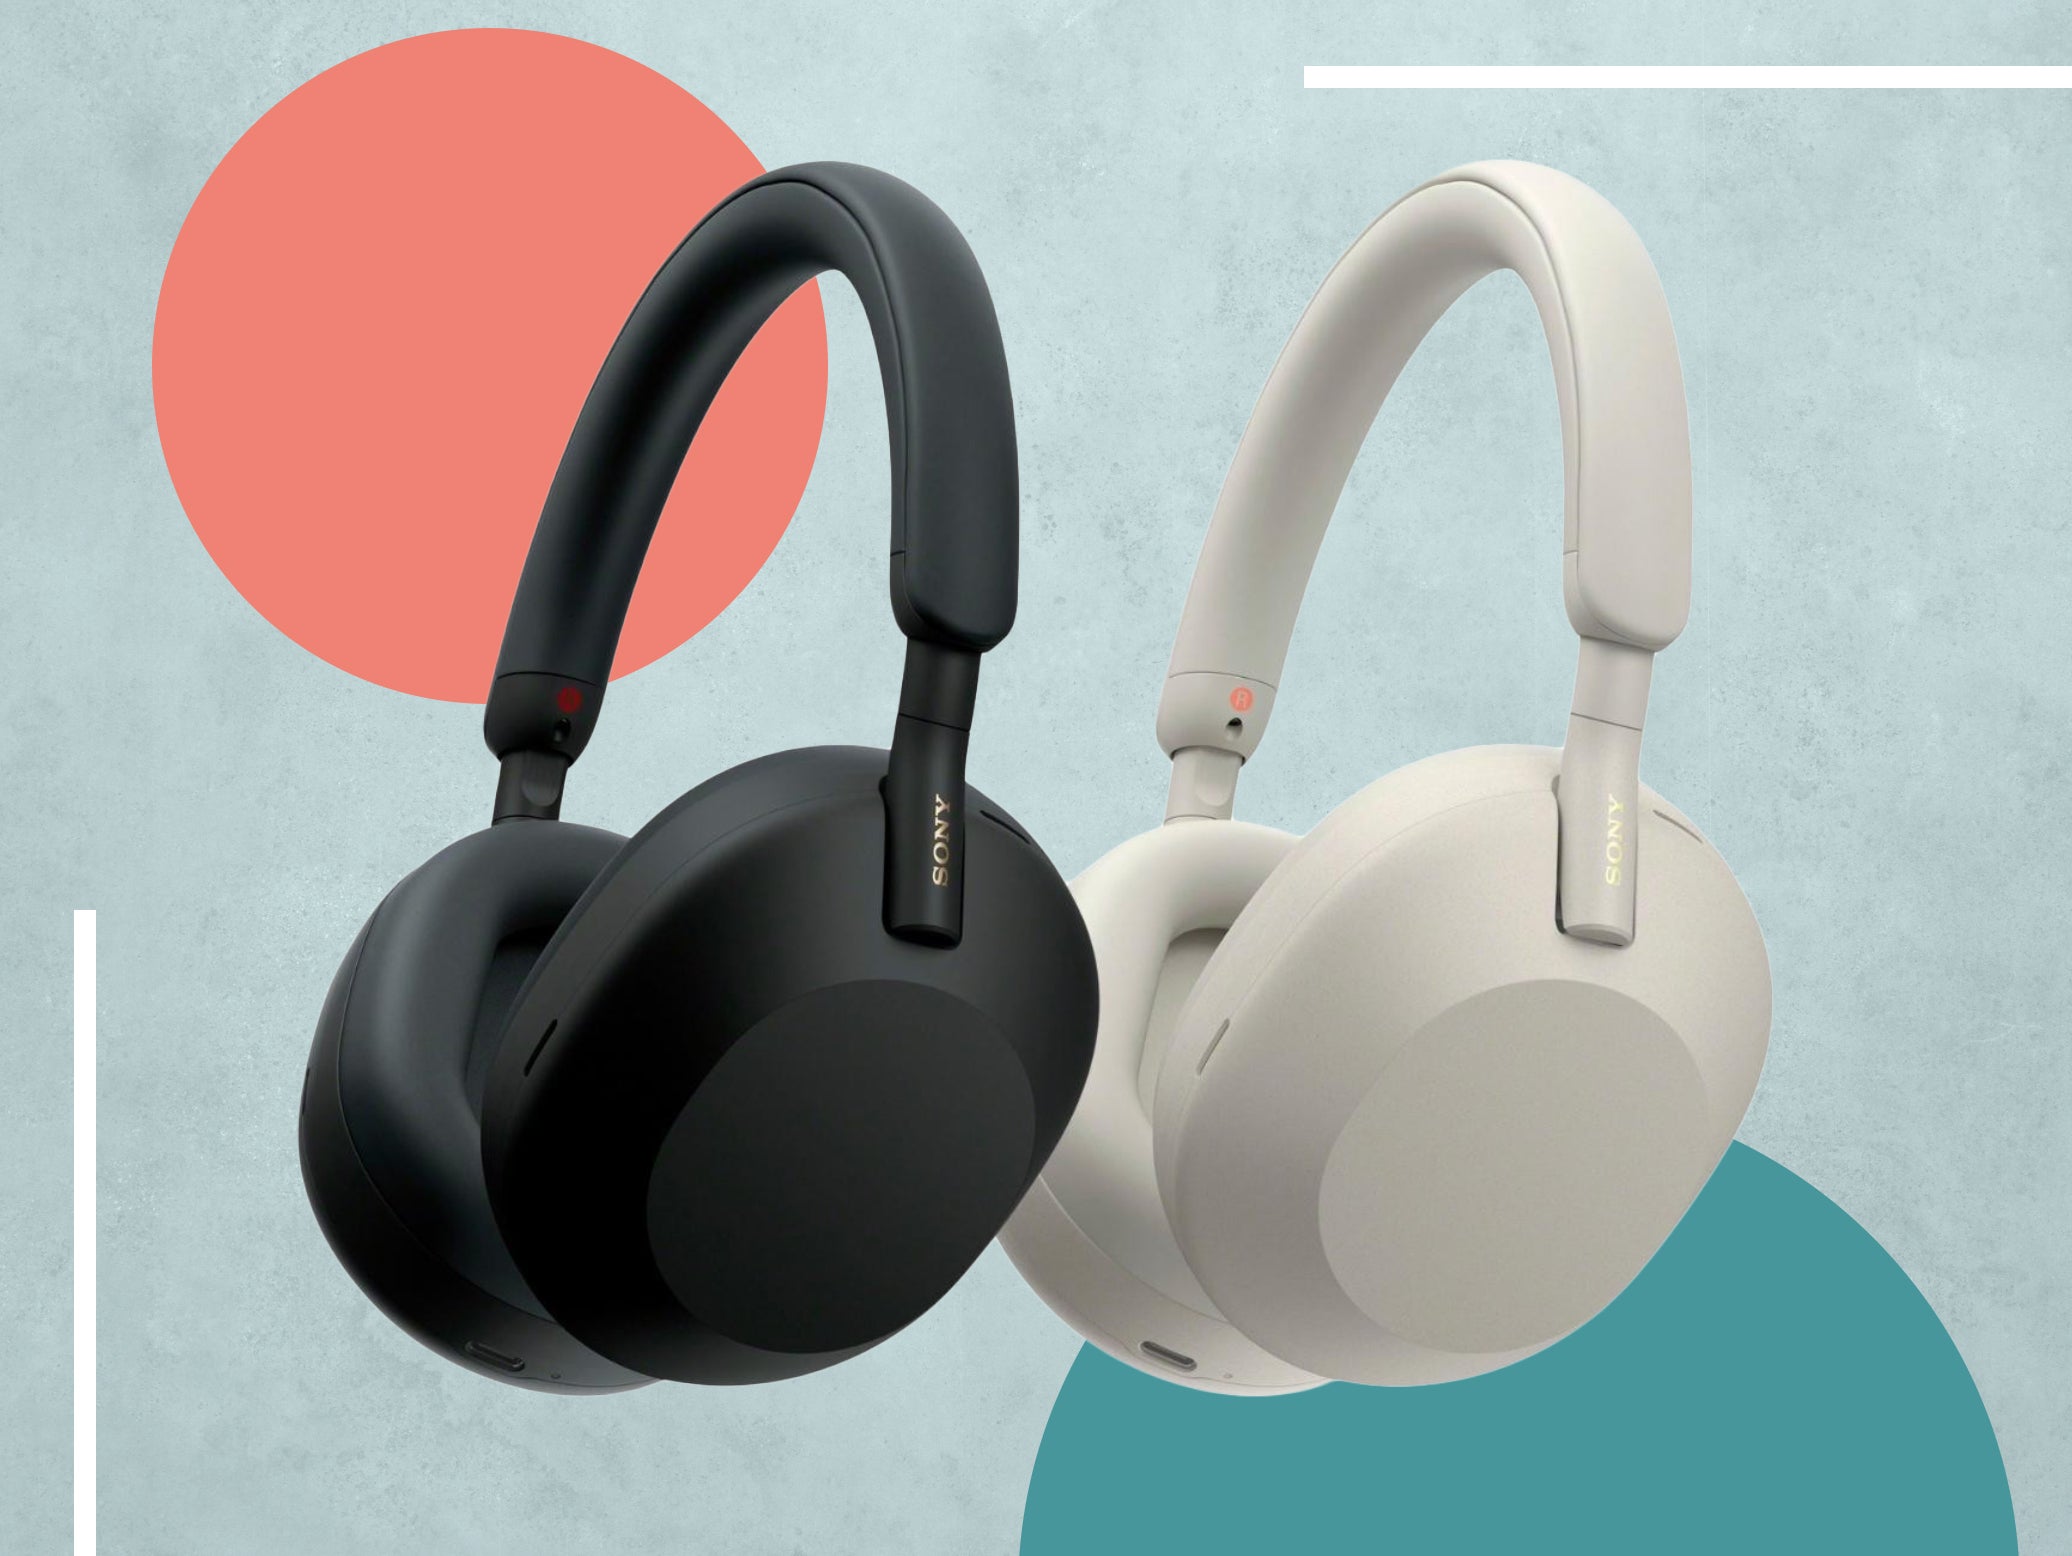 With new processors and drivers and a fresh design, these headphones live up to the hype